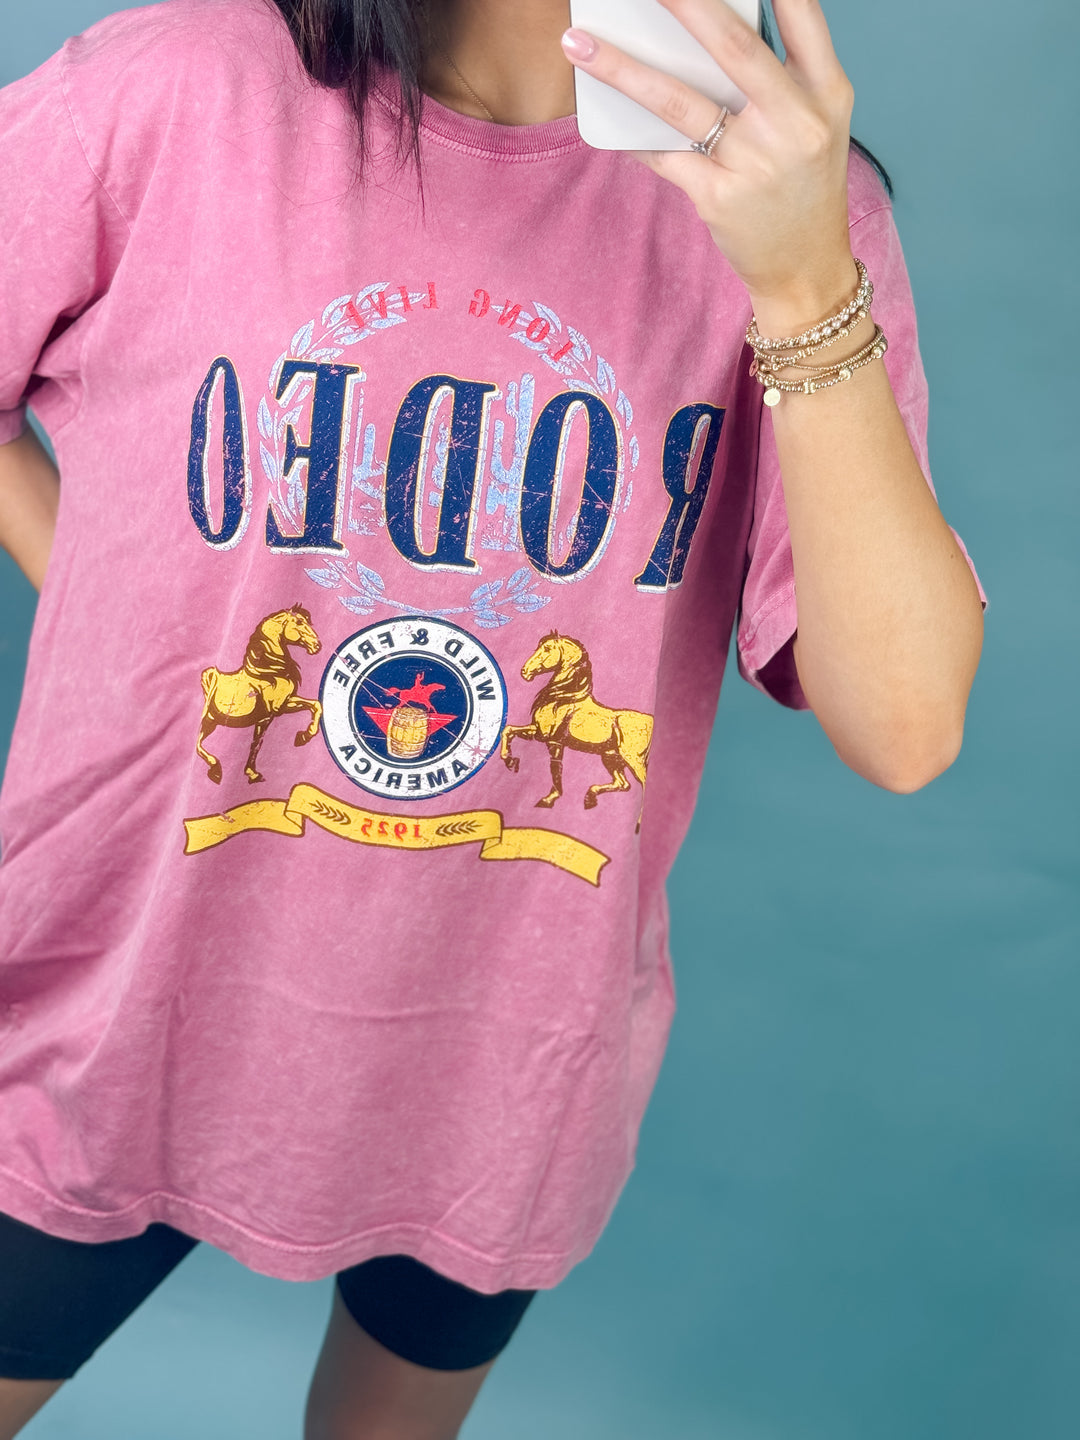 Long Live Rodeo Vintage Graphic Tee "Pink"